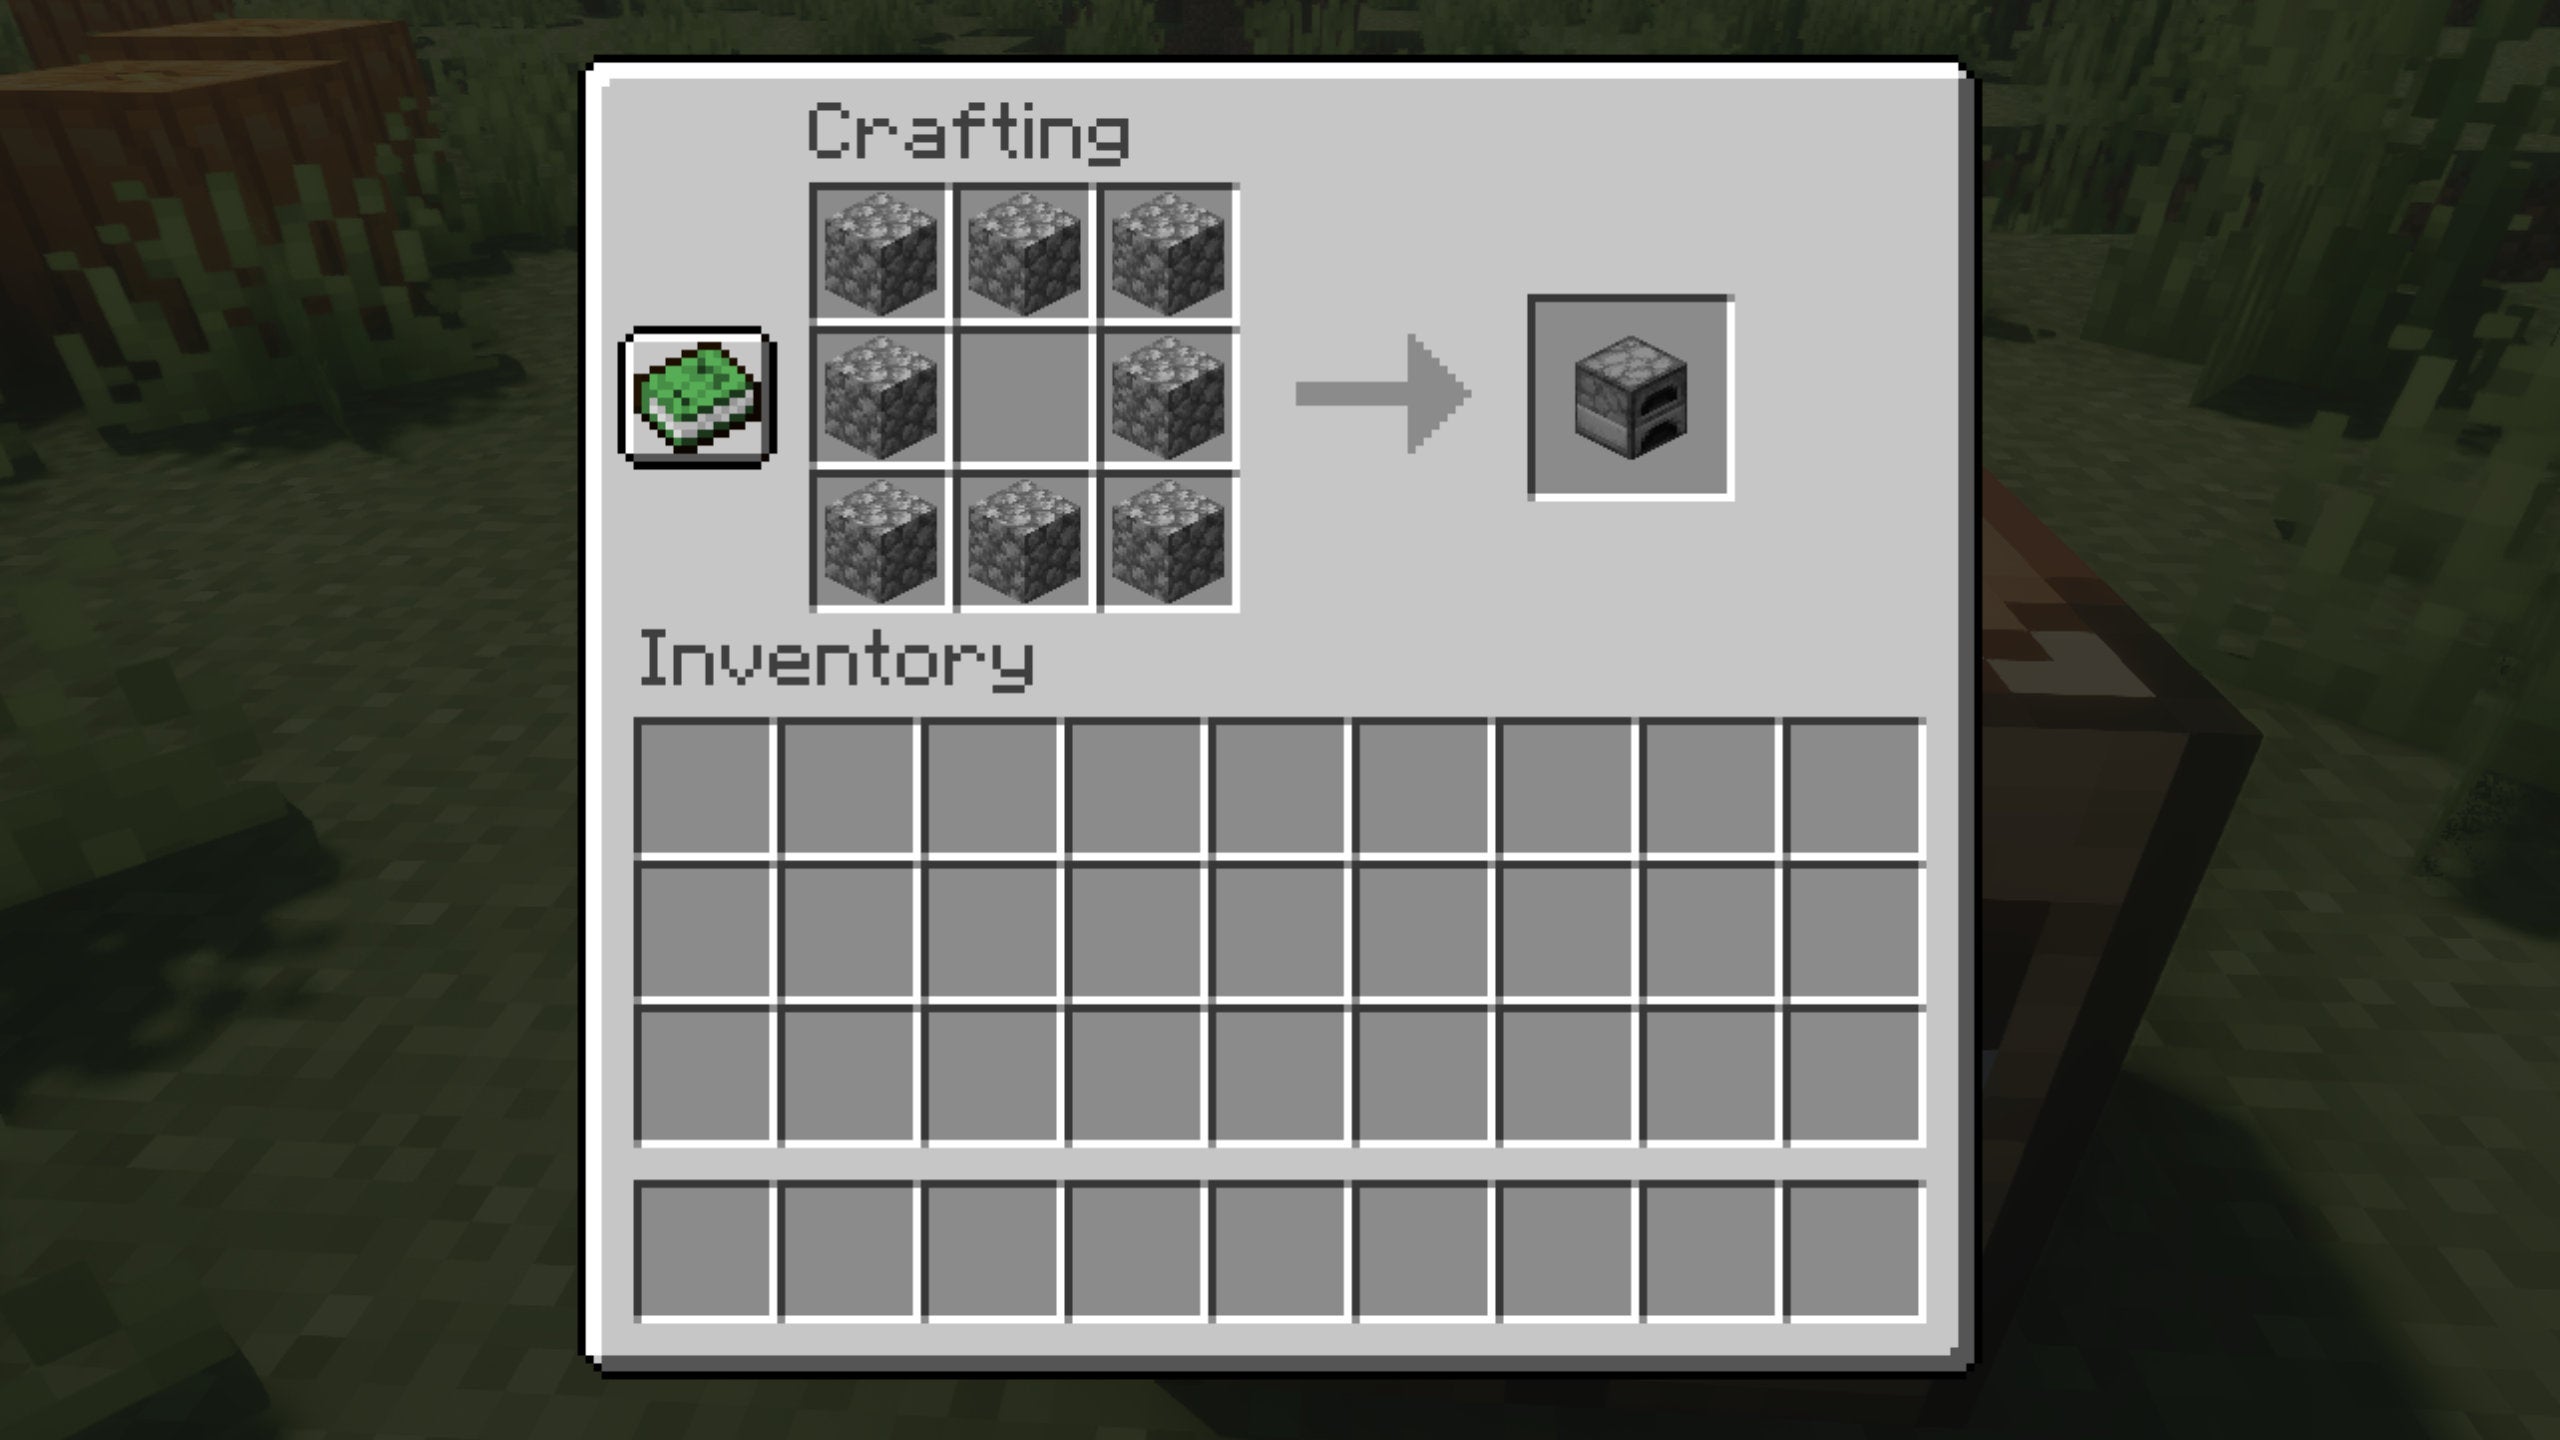 The Crafting Table window in Minecraft, inside which the player is crafting a stone furnace.